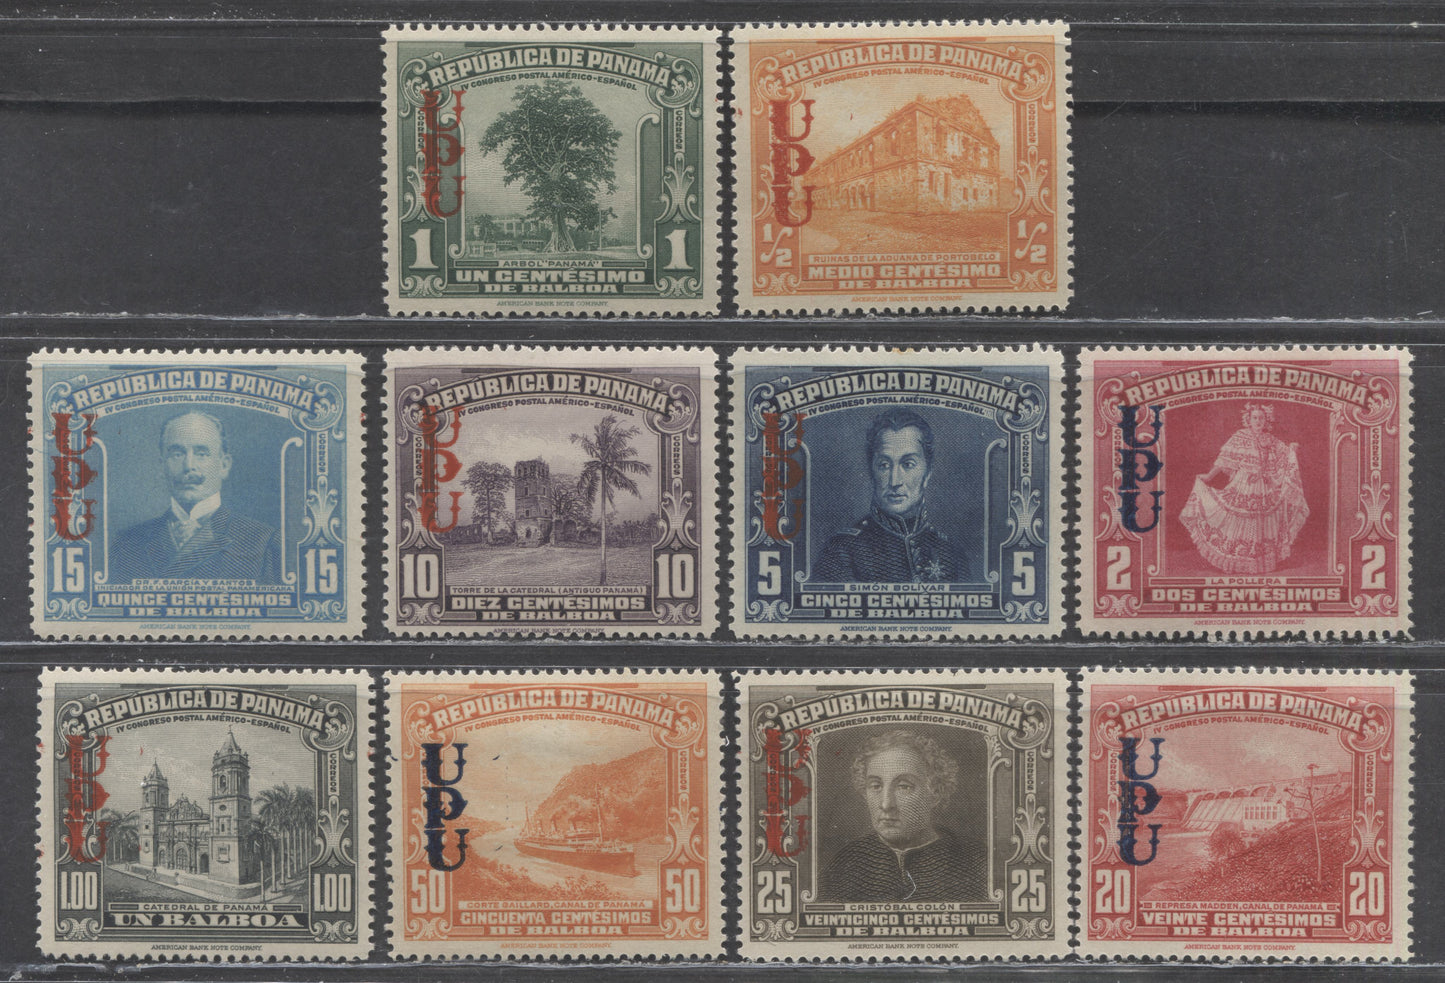 Lot 106 Panama SC#288/297 1937 UPU Overprints, 9 VFOG Singles, Click on Listing to See ALL Pictures, 2022 Scott Classic Cat. $36.55 USD